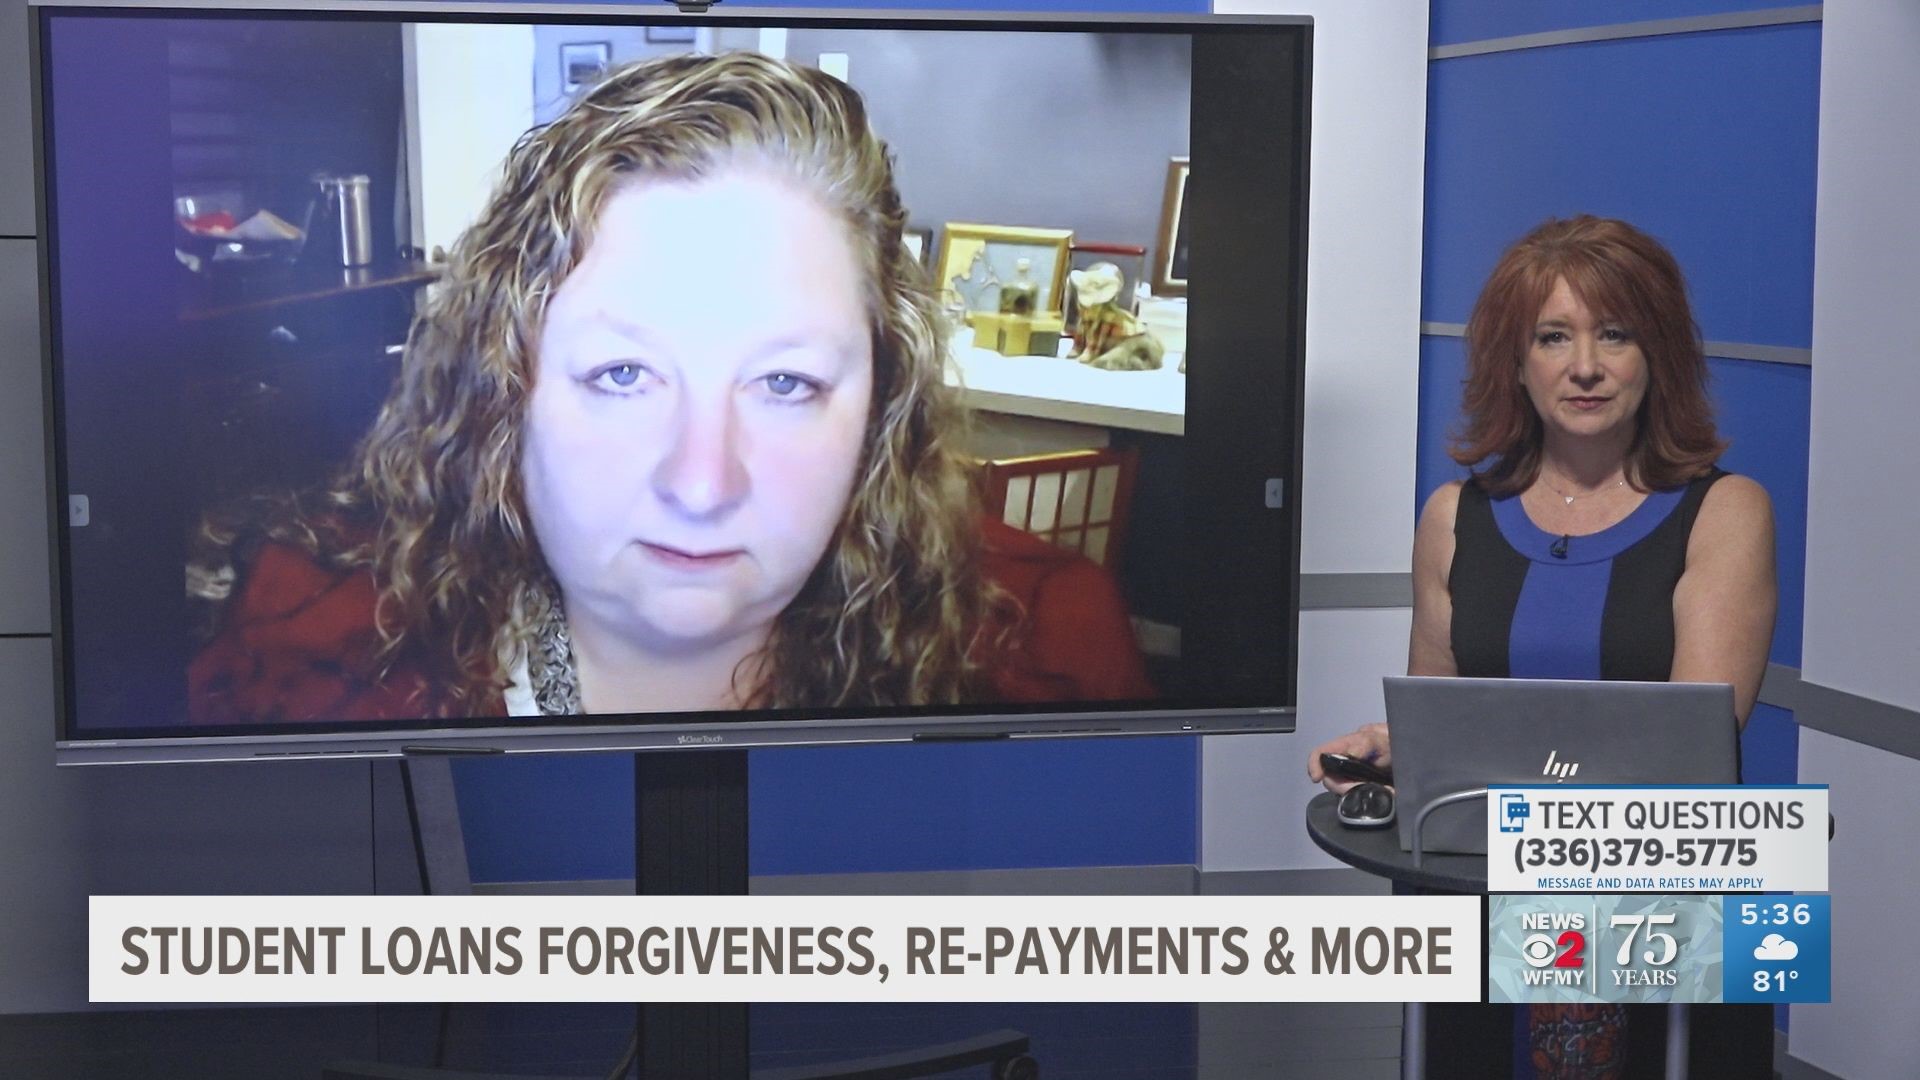 A student loans expert discusses what you should know about student loans, repayment, and forgiveness.